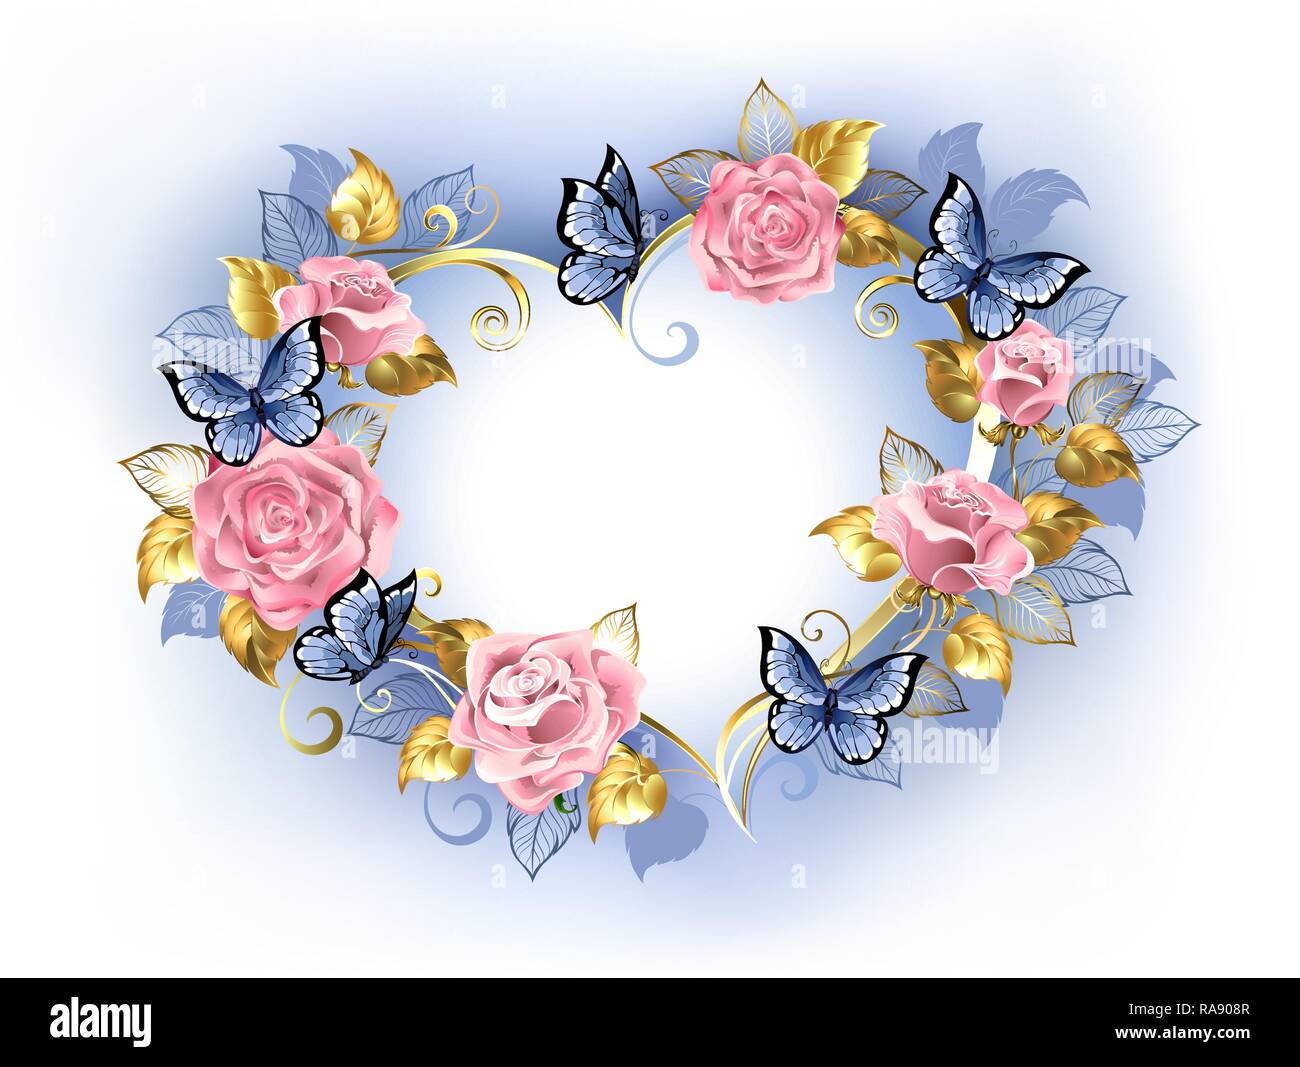 Bright banner in shape of heart with gold frame, decorated with pink roses, leaves and blue butterflies on white background. Stock Vector